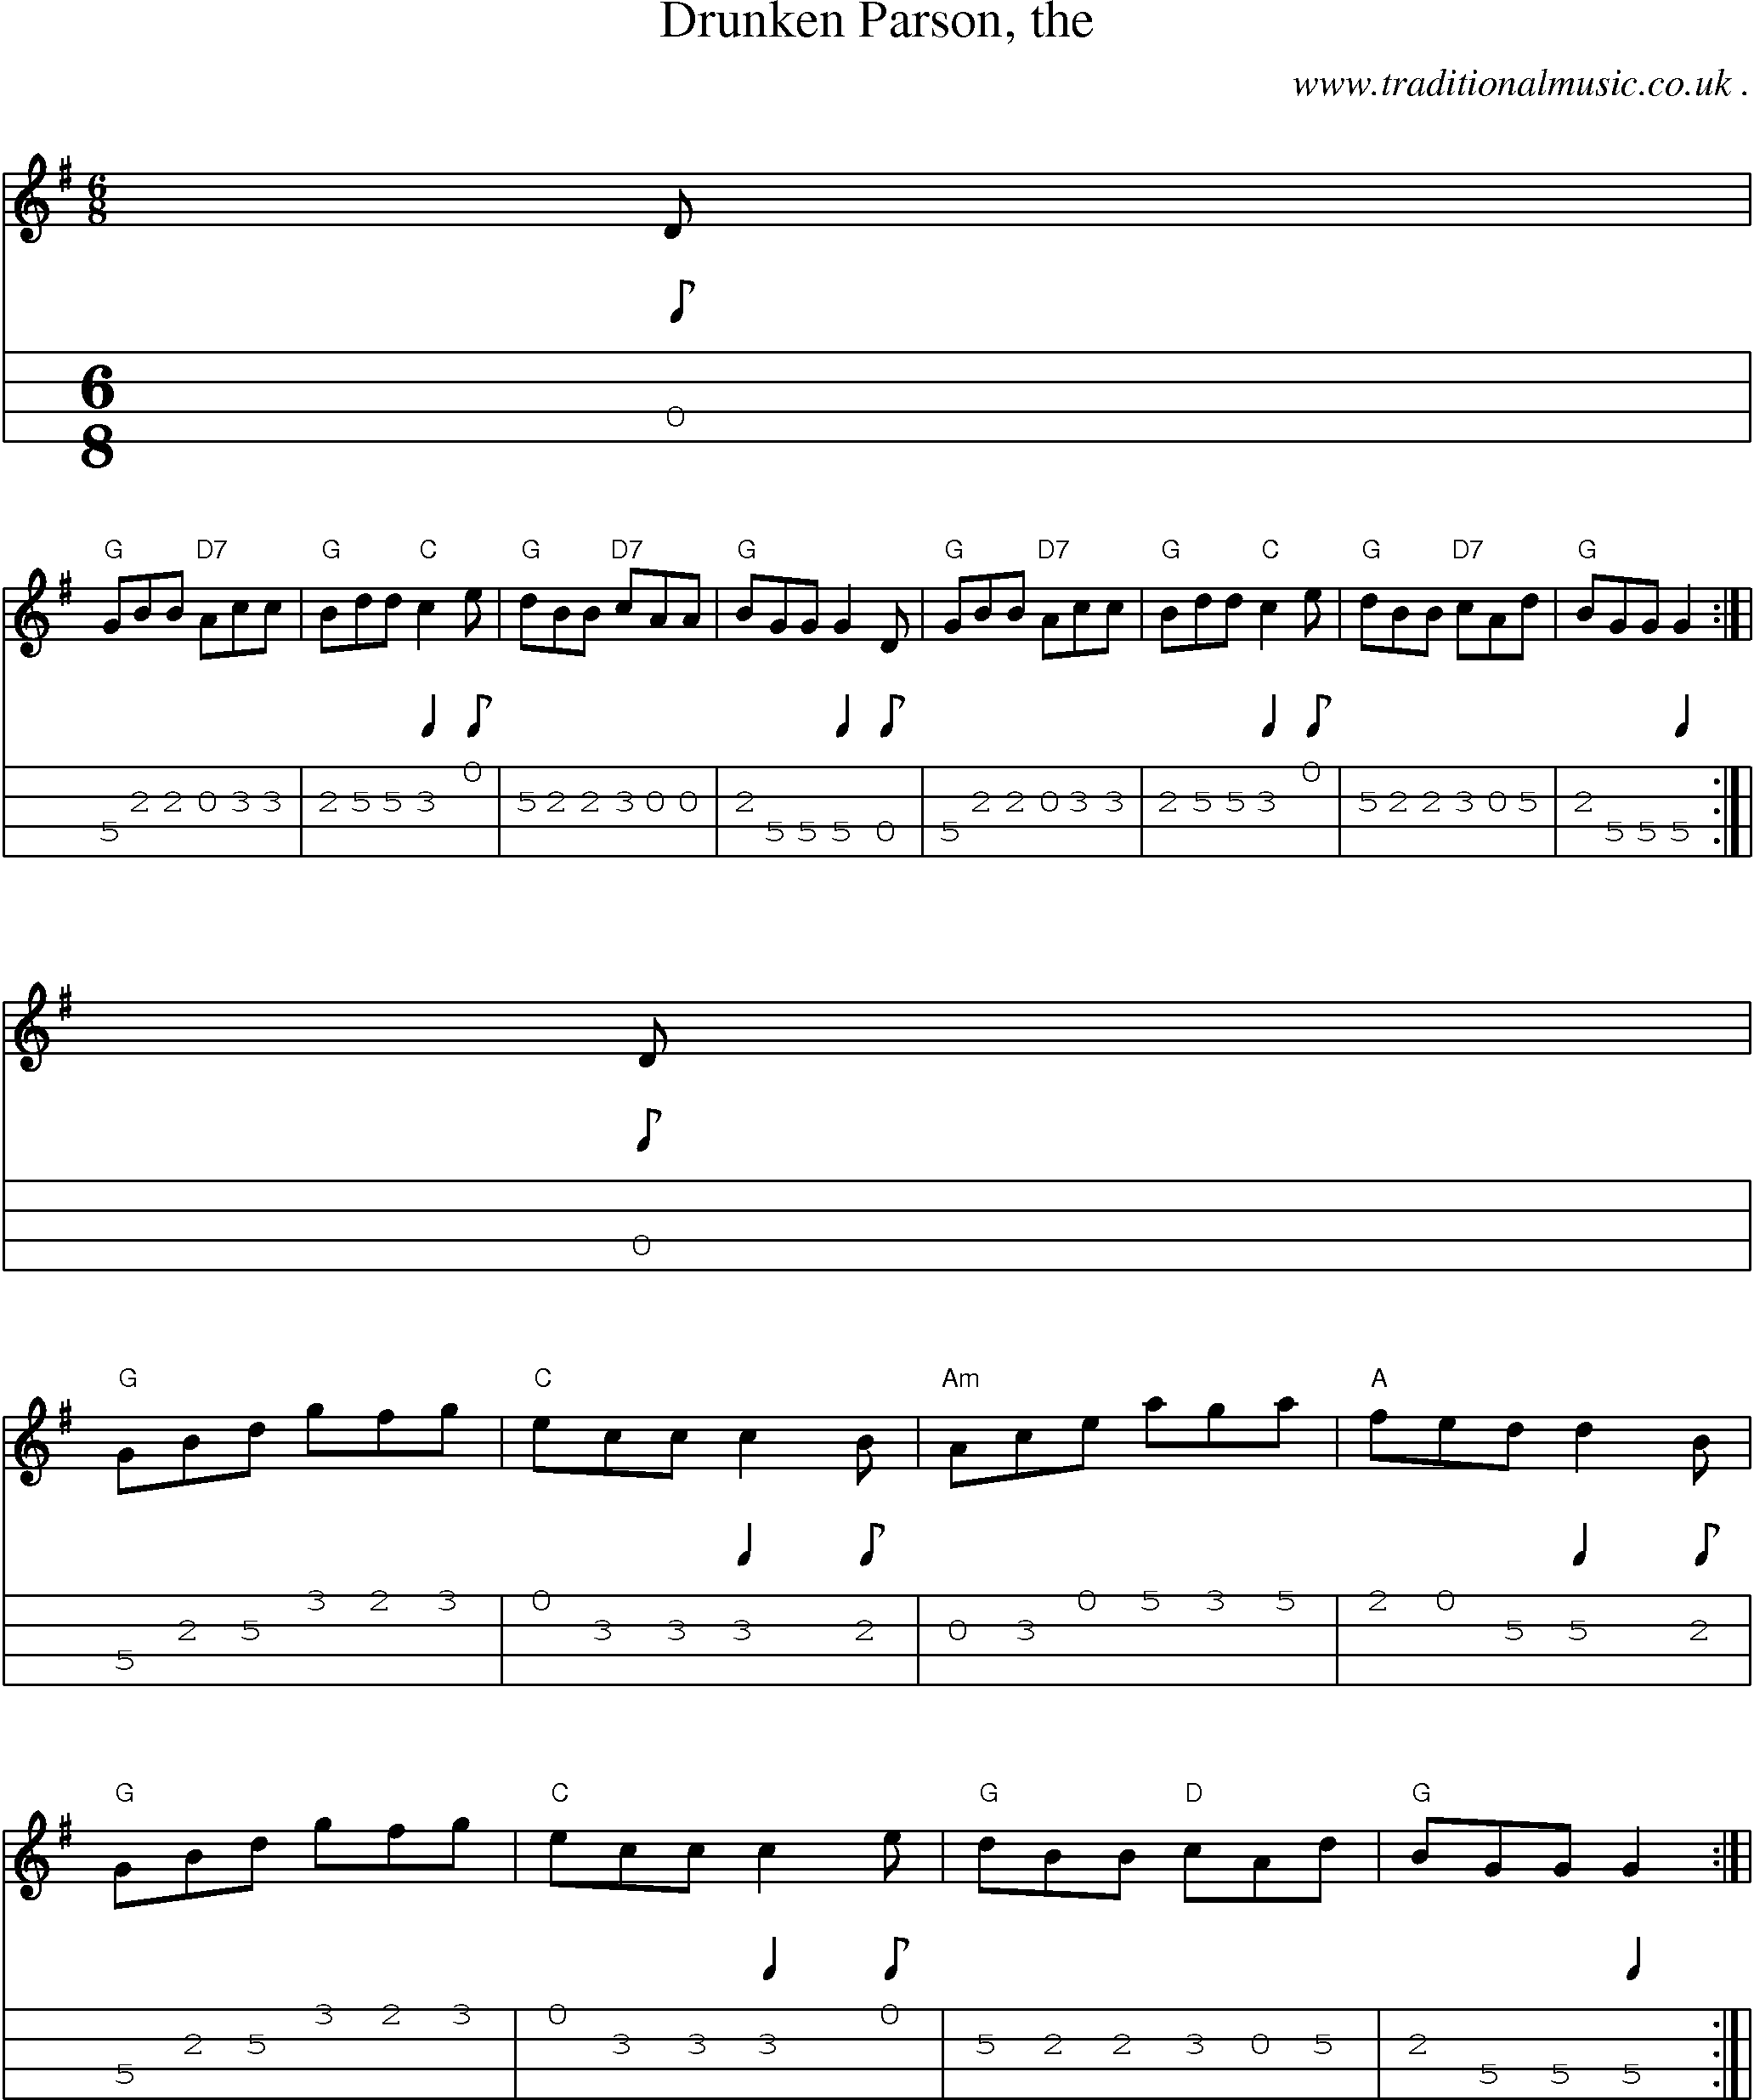 Sheet-music  score, Chords and Mandolin Tabs for Drunken Parson The